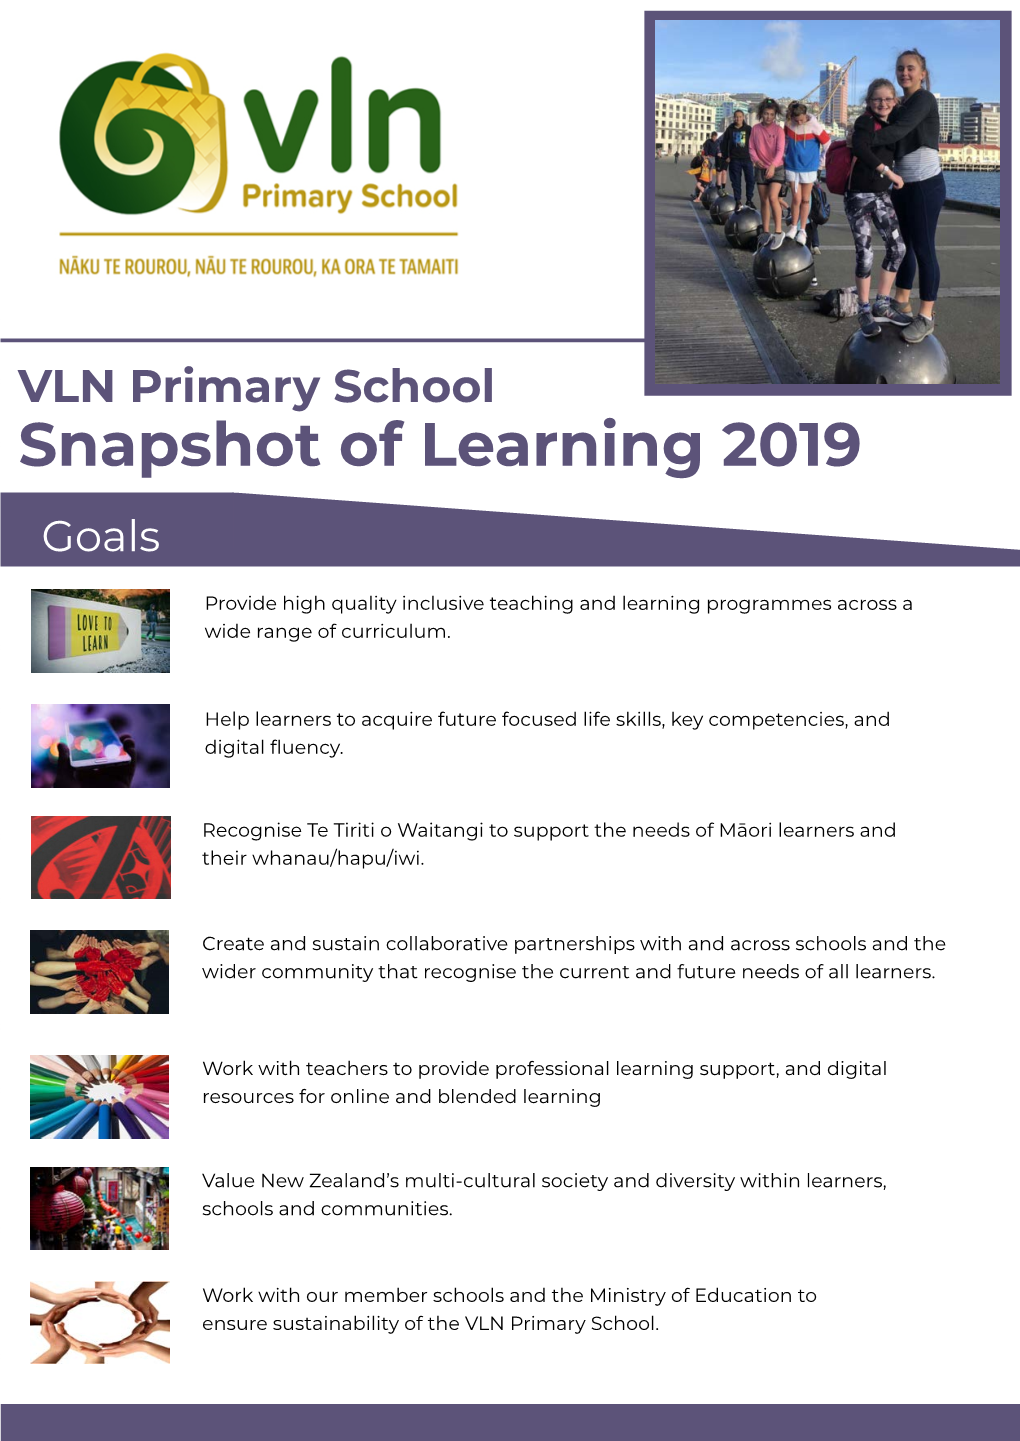 Snapshot of Learning 2019 Goals